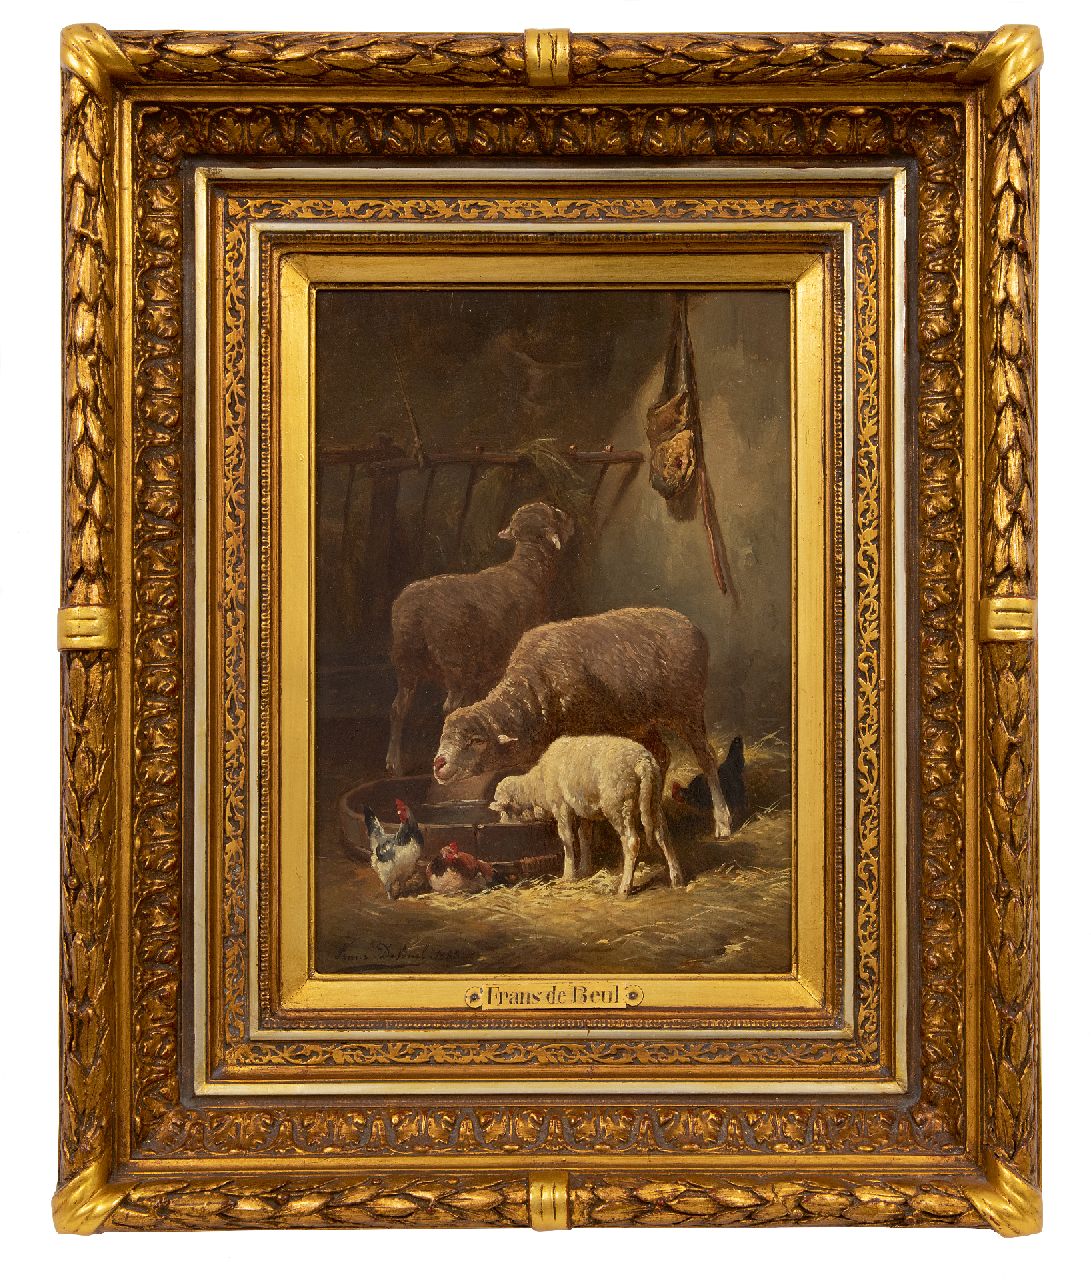 Beul F. de | Frans de Beul, Sheep in the stable, oil on panel 34.3 x 23.2 cm, signed l.l. and dated 1883